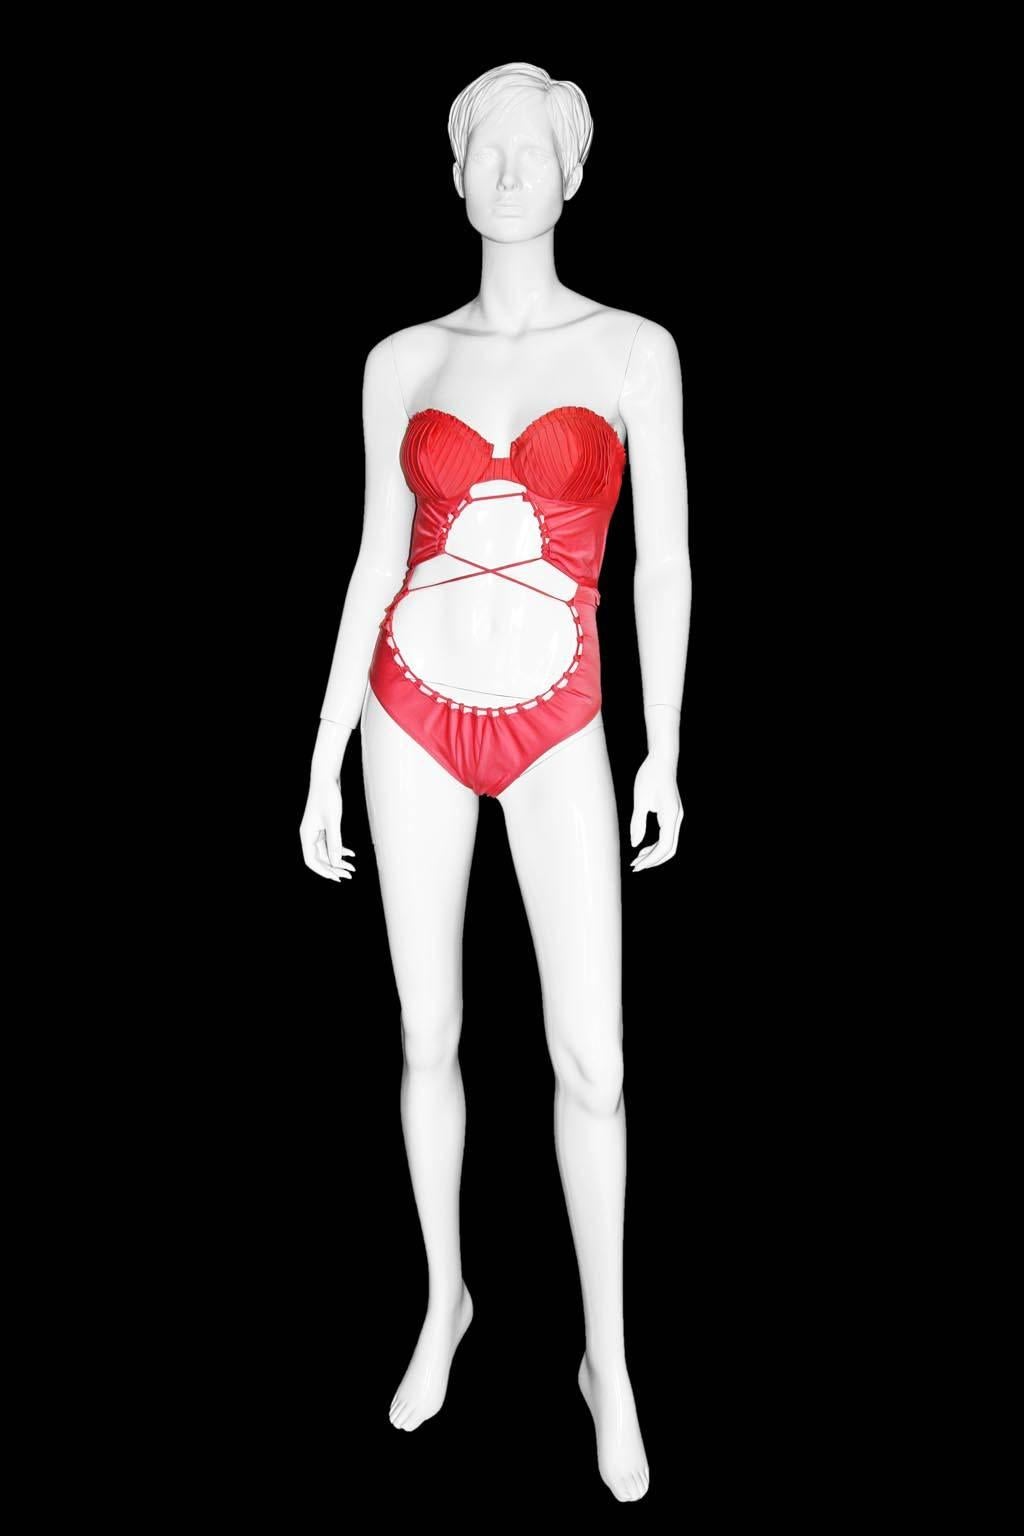 The Most Heavenly Tom Ford Gucci Spring Summer 2004 Runway Collection Coral Pink Swimsuit!

We've been international collectors of Tom Ford for Gucci & YSL since 2005, buying primarily for ourselves &  wholesaling to a number of collectors &